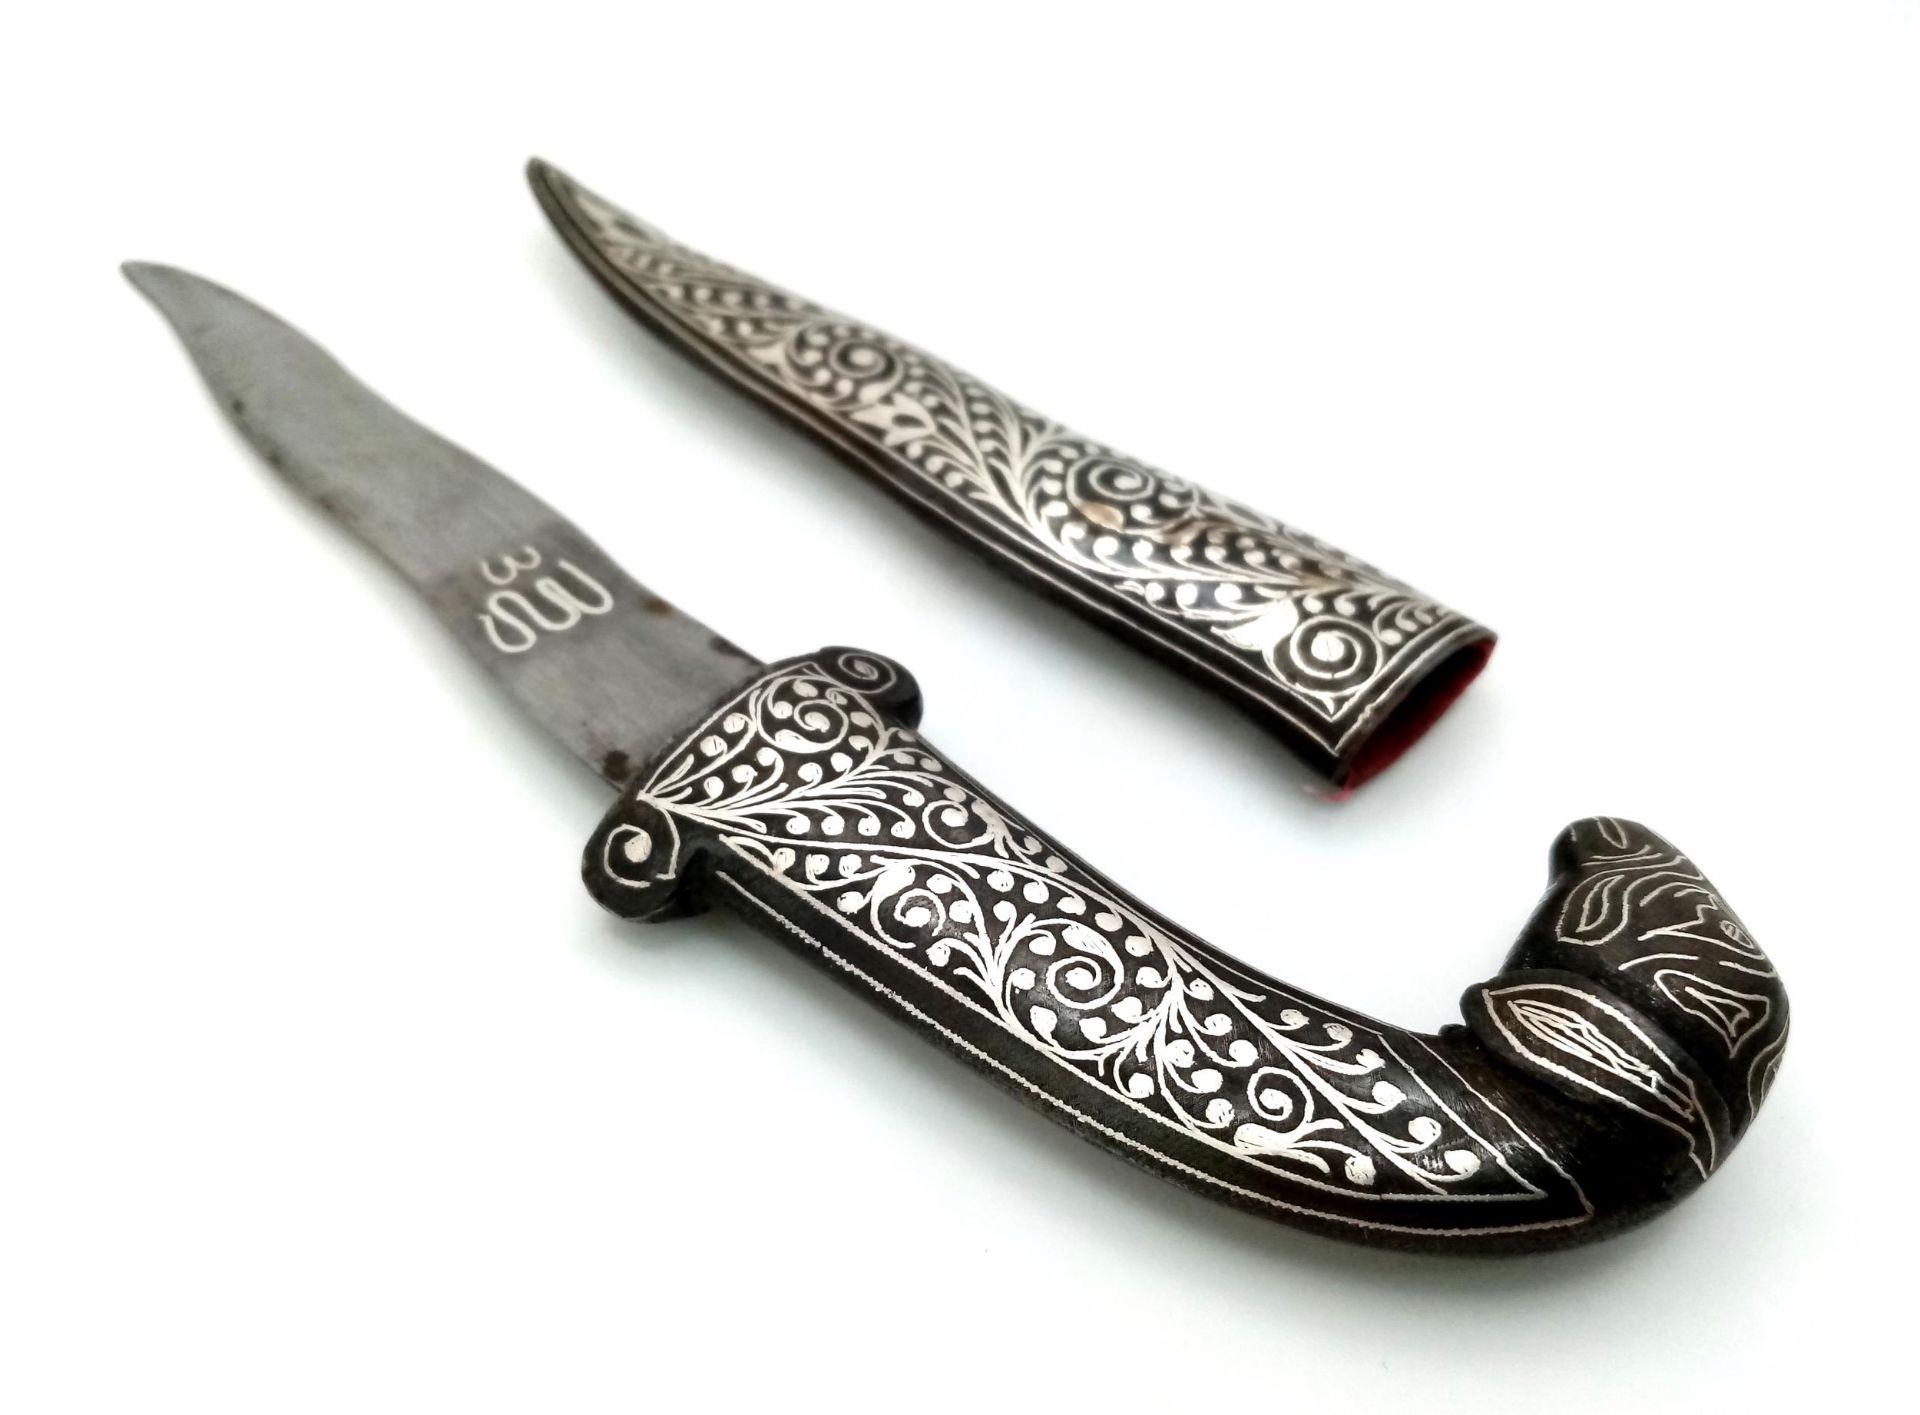 Vintage or Most Likely Antique, Ornate Scroll Detail Ram’s Head Mughal White Metal Dagger with - Image 2 of 4